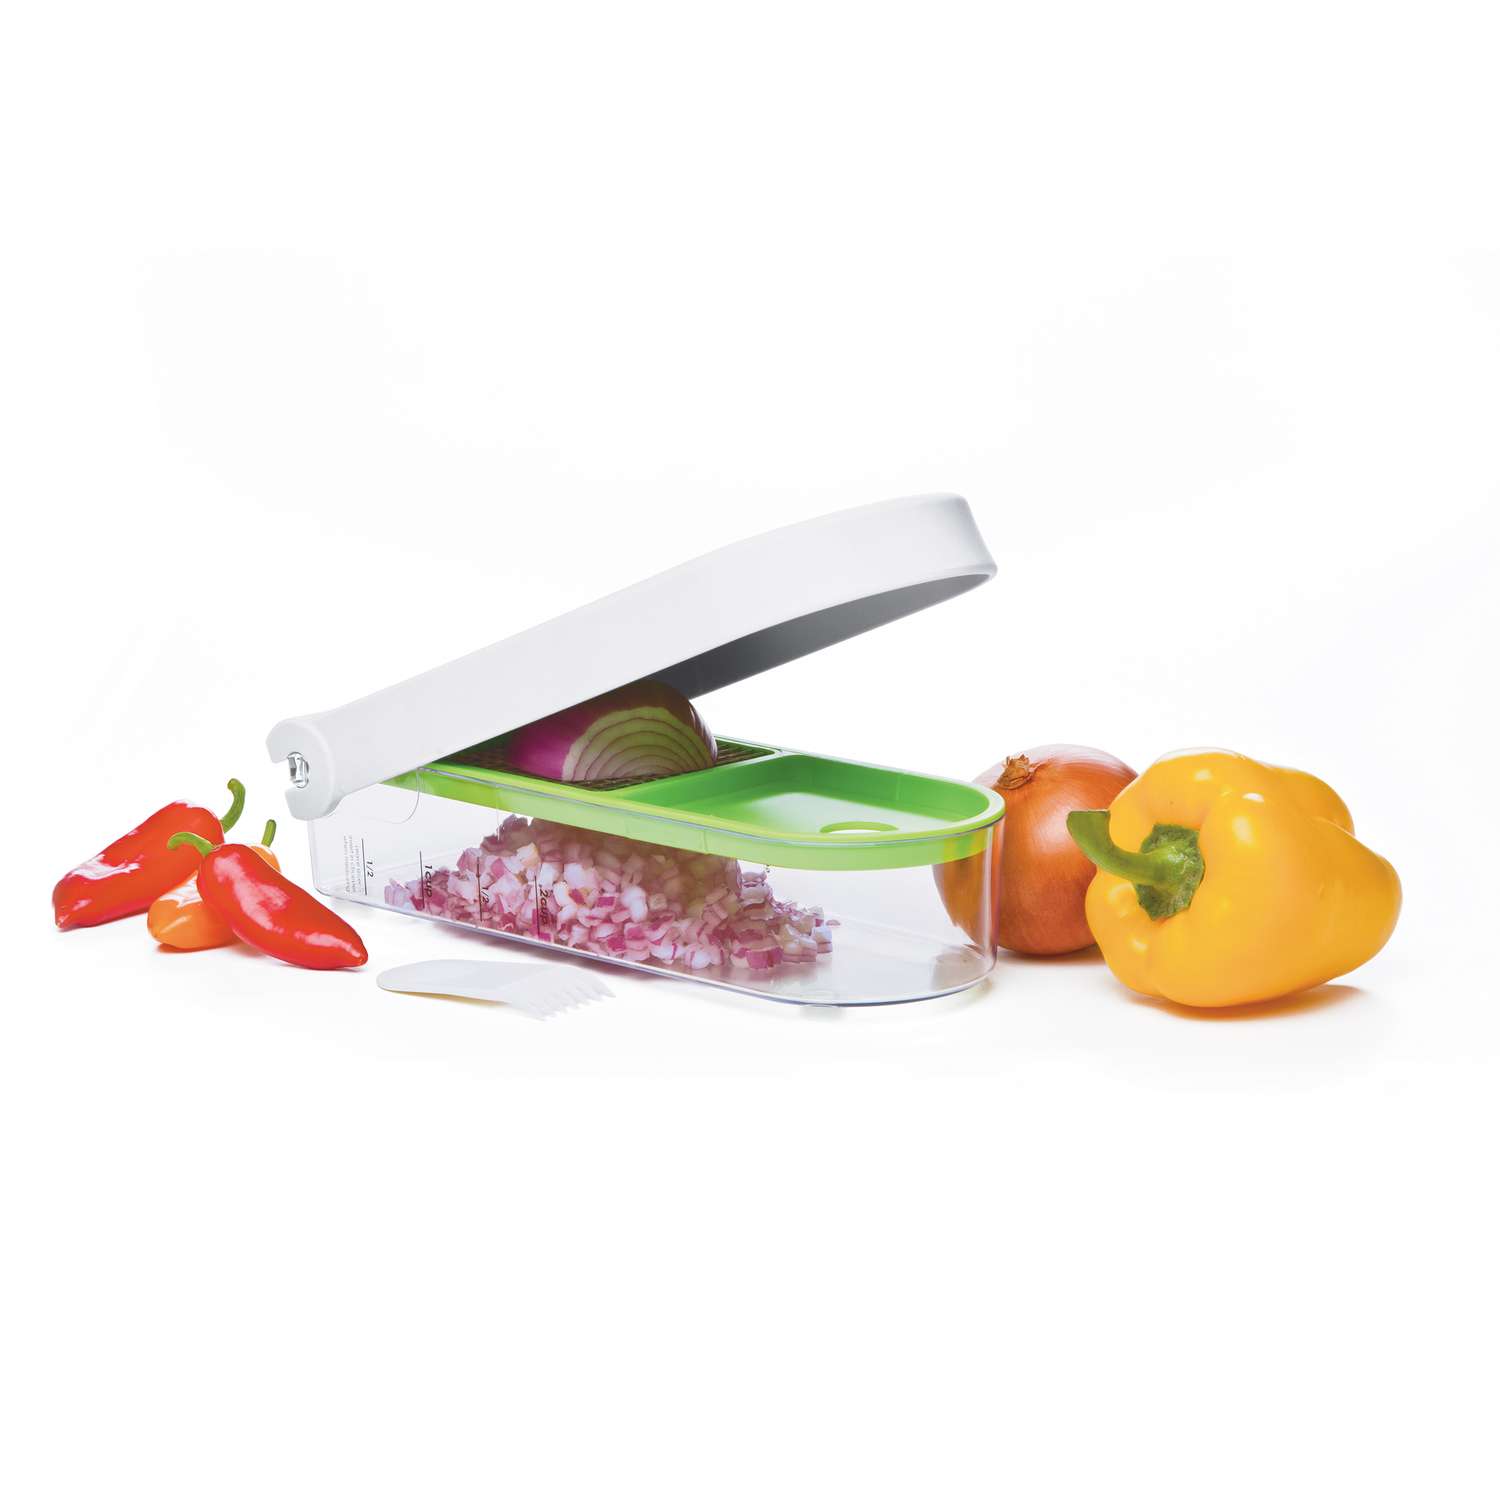 New Kitchen Gadgets- Torch And Chopper for Sale in Oregon City, OR